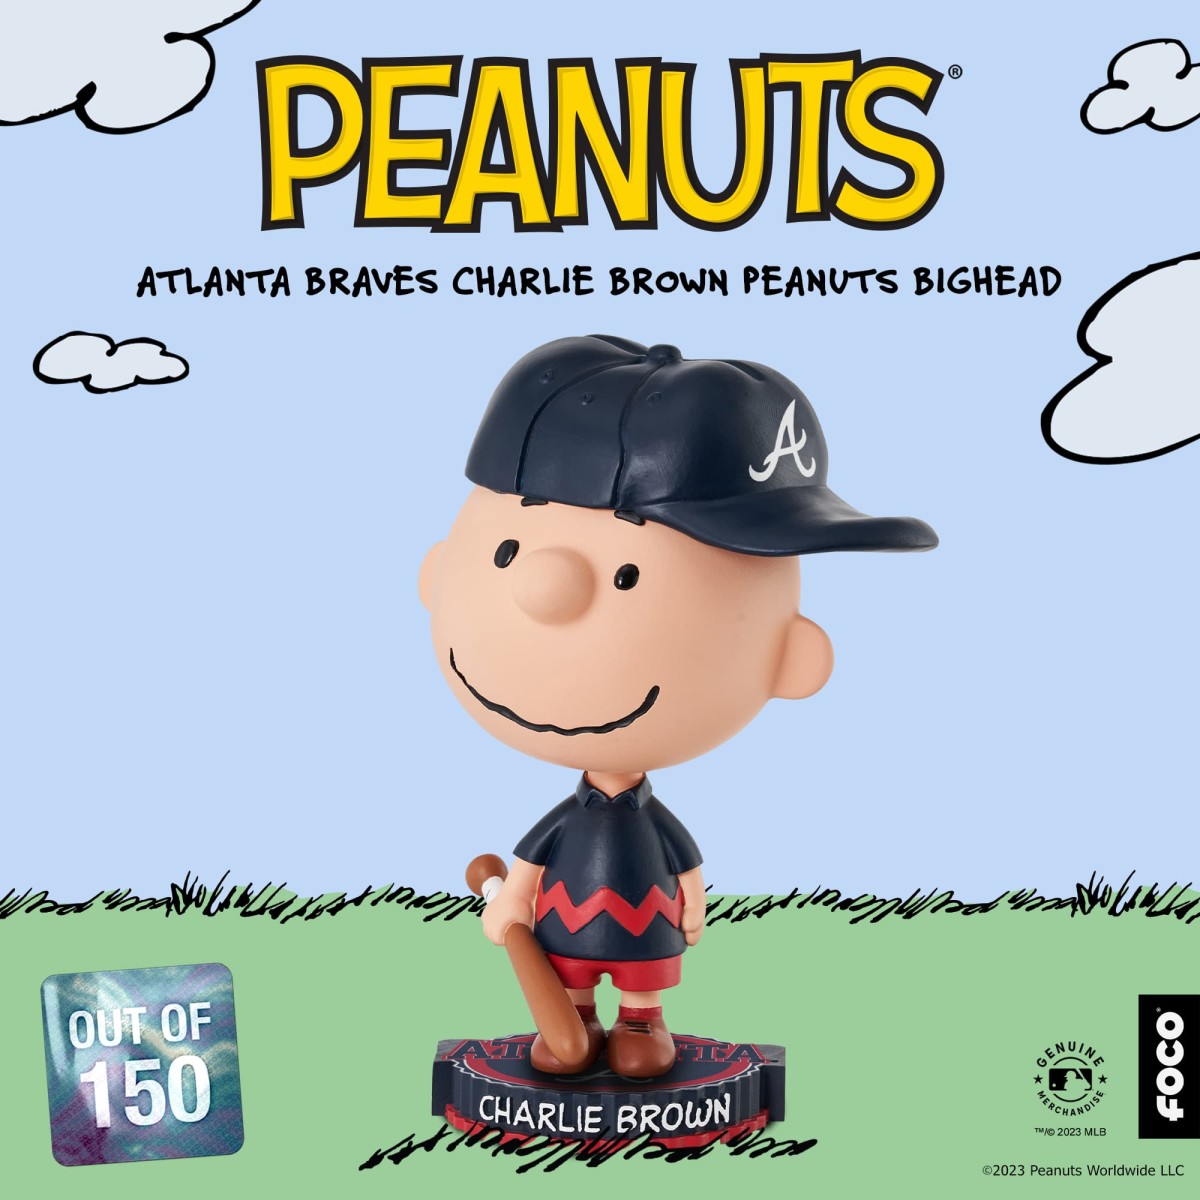 FOCO expands Big Hat Home Run celebration line of bobbleheads to